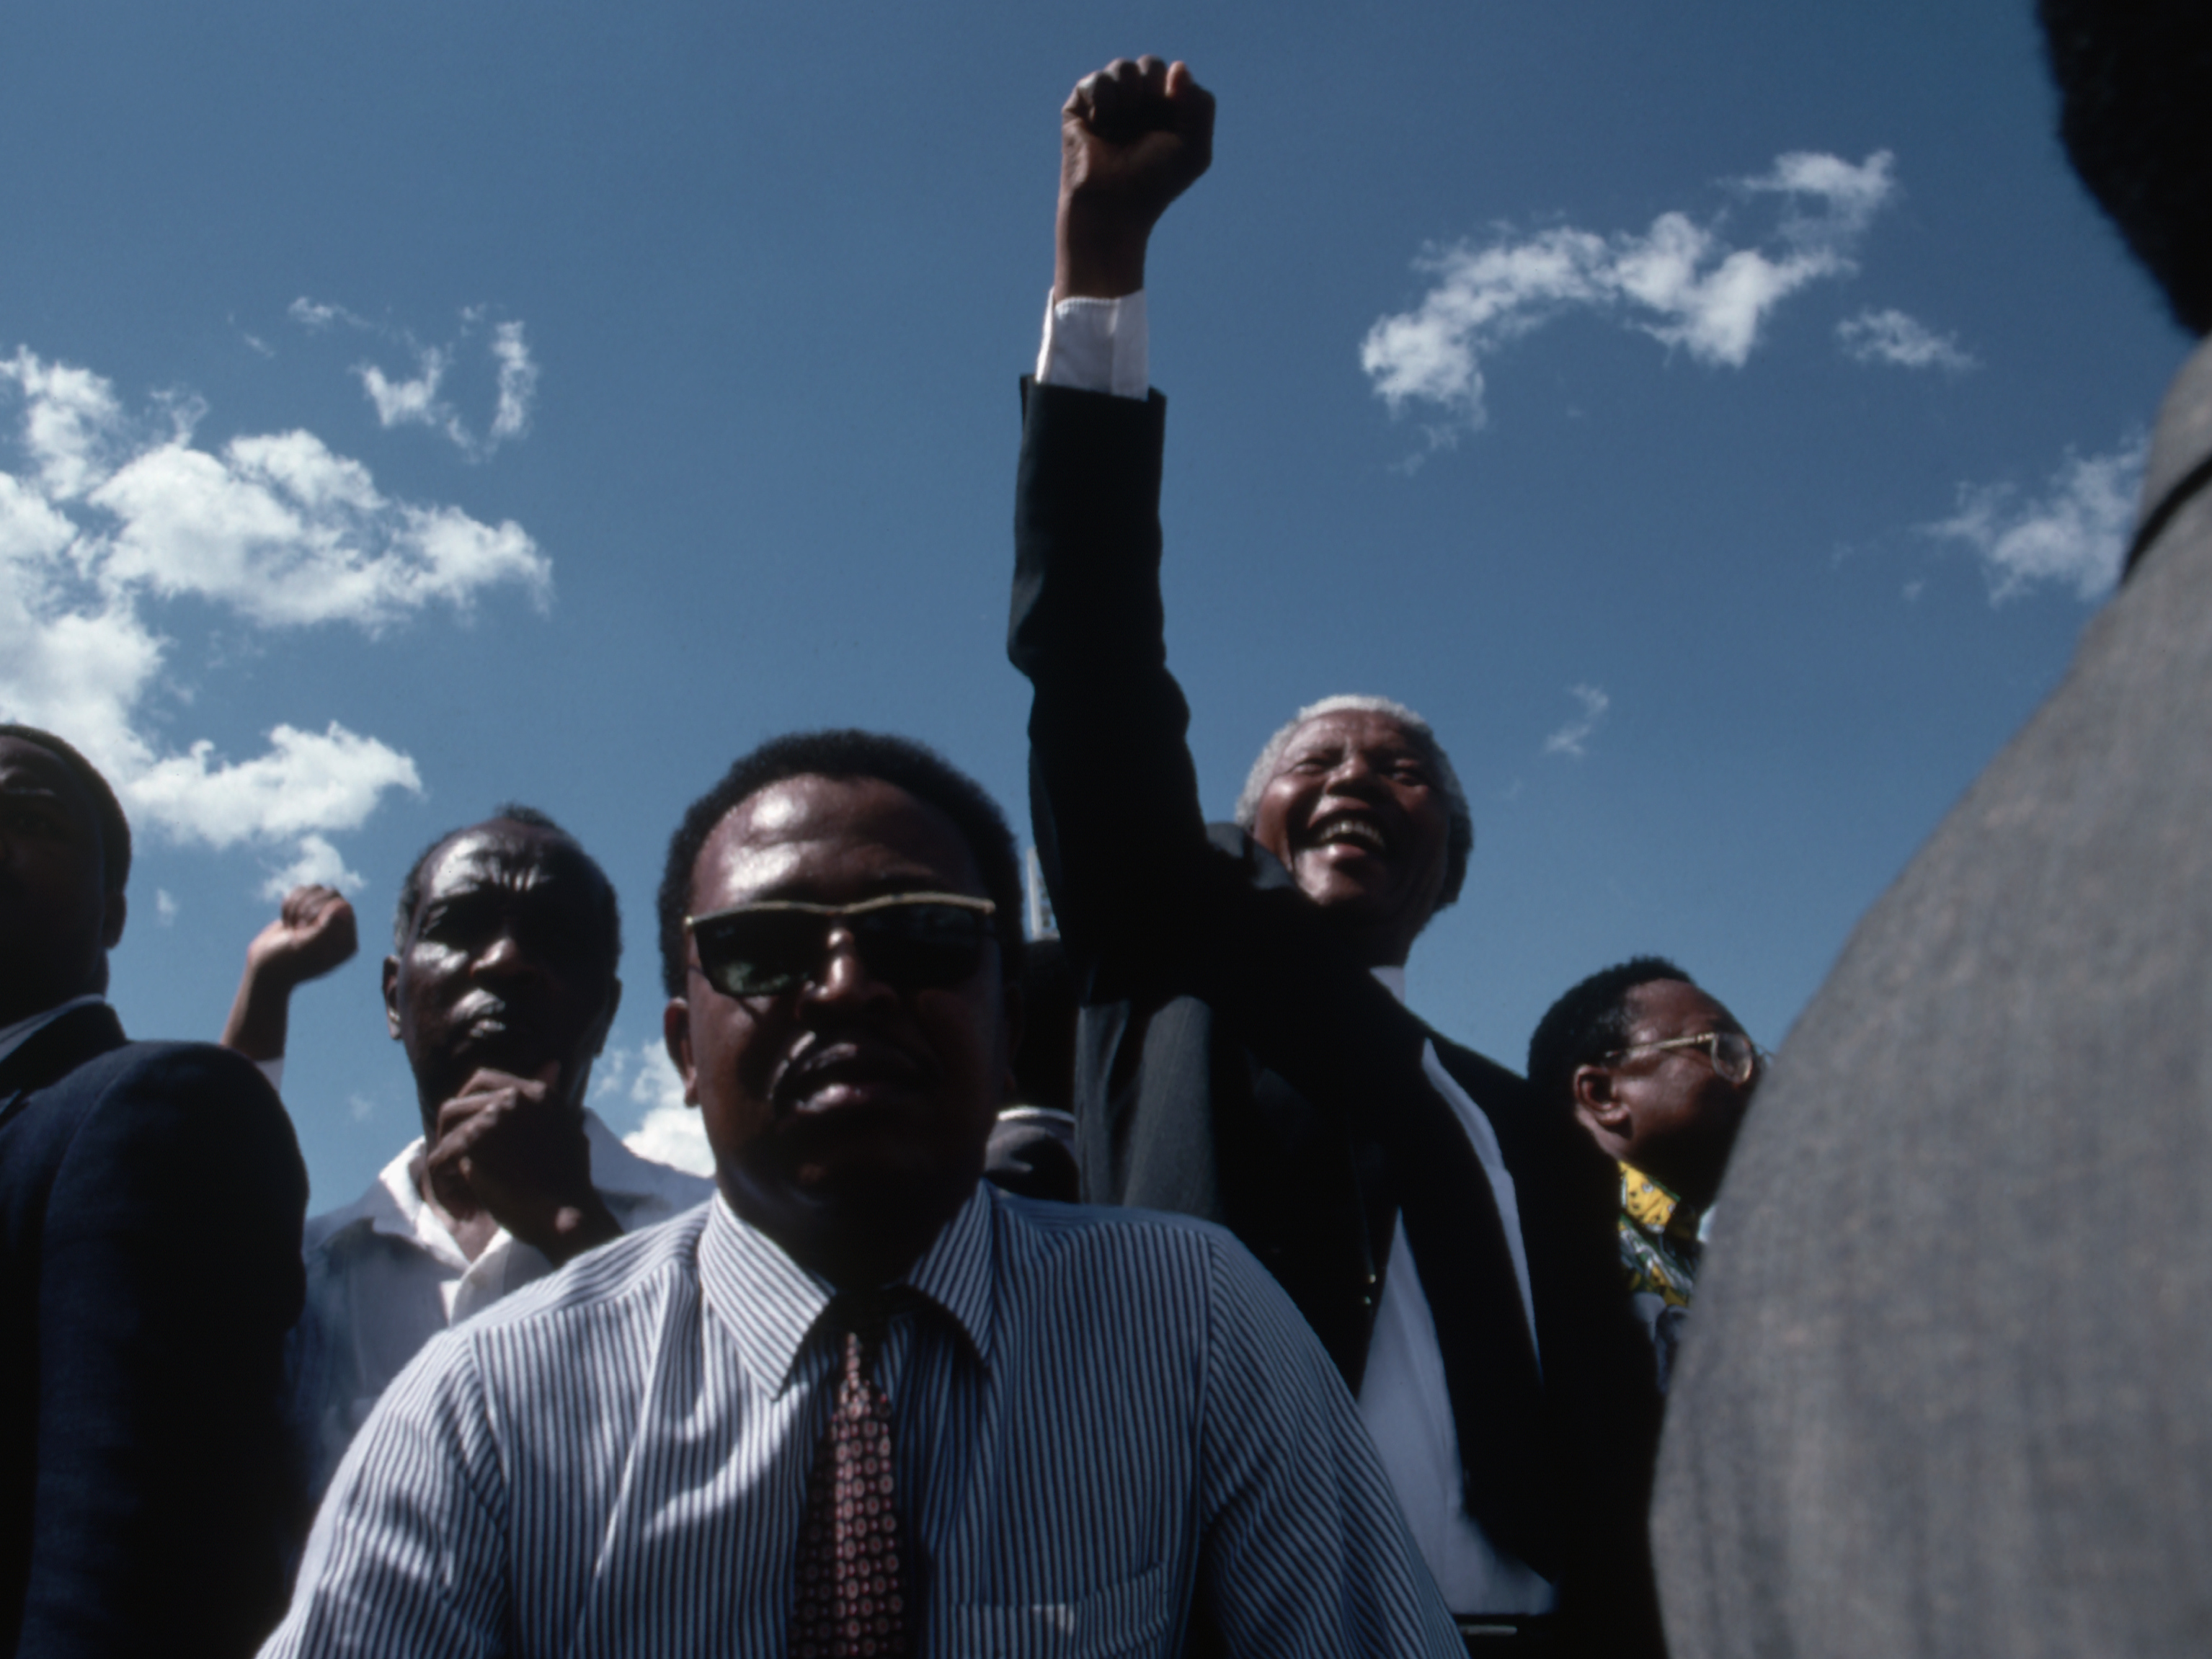 Bodyguards keep close watch as Nelson Mandela celebrates his victory in the South African presidential elections of 1994. As the head of the African National Congress, he helped to build the country